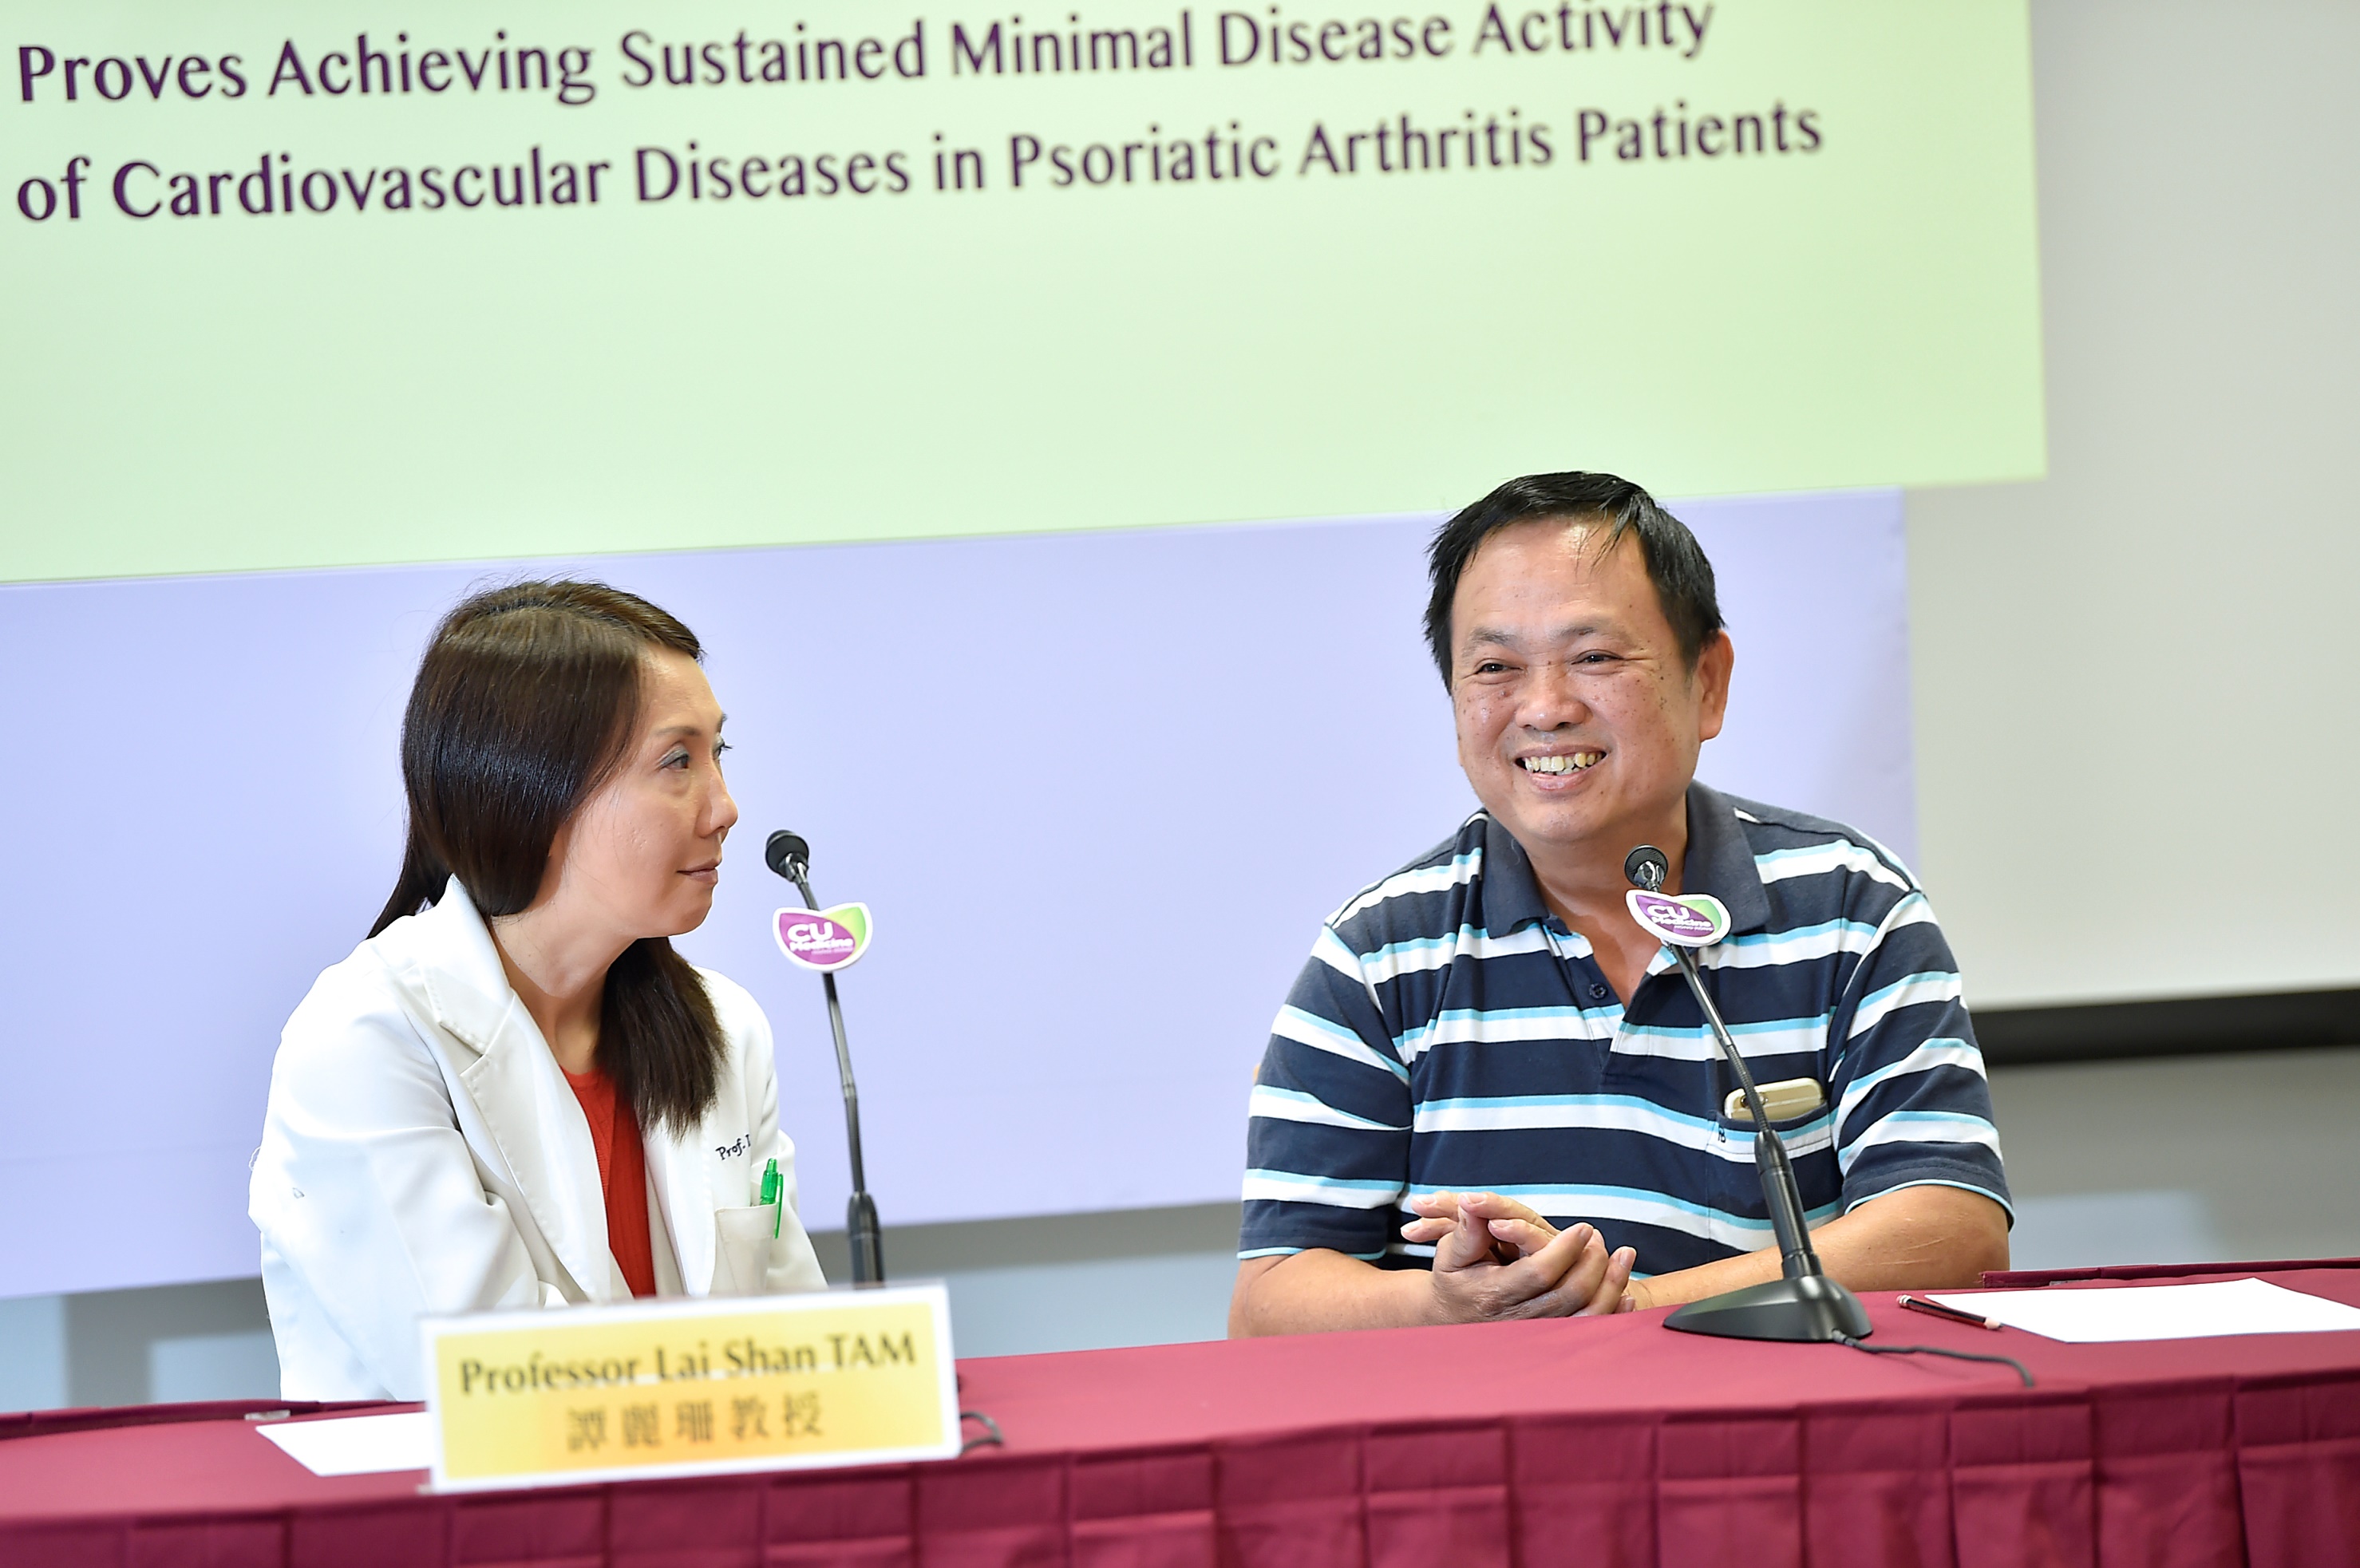 Psoriatic arthritis patient Mr YU (right) shares that his condition has become stable after treatment and the disease has not much impact on his daily life.